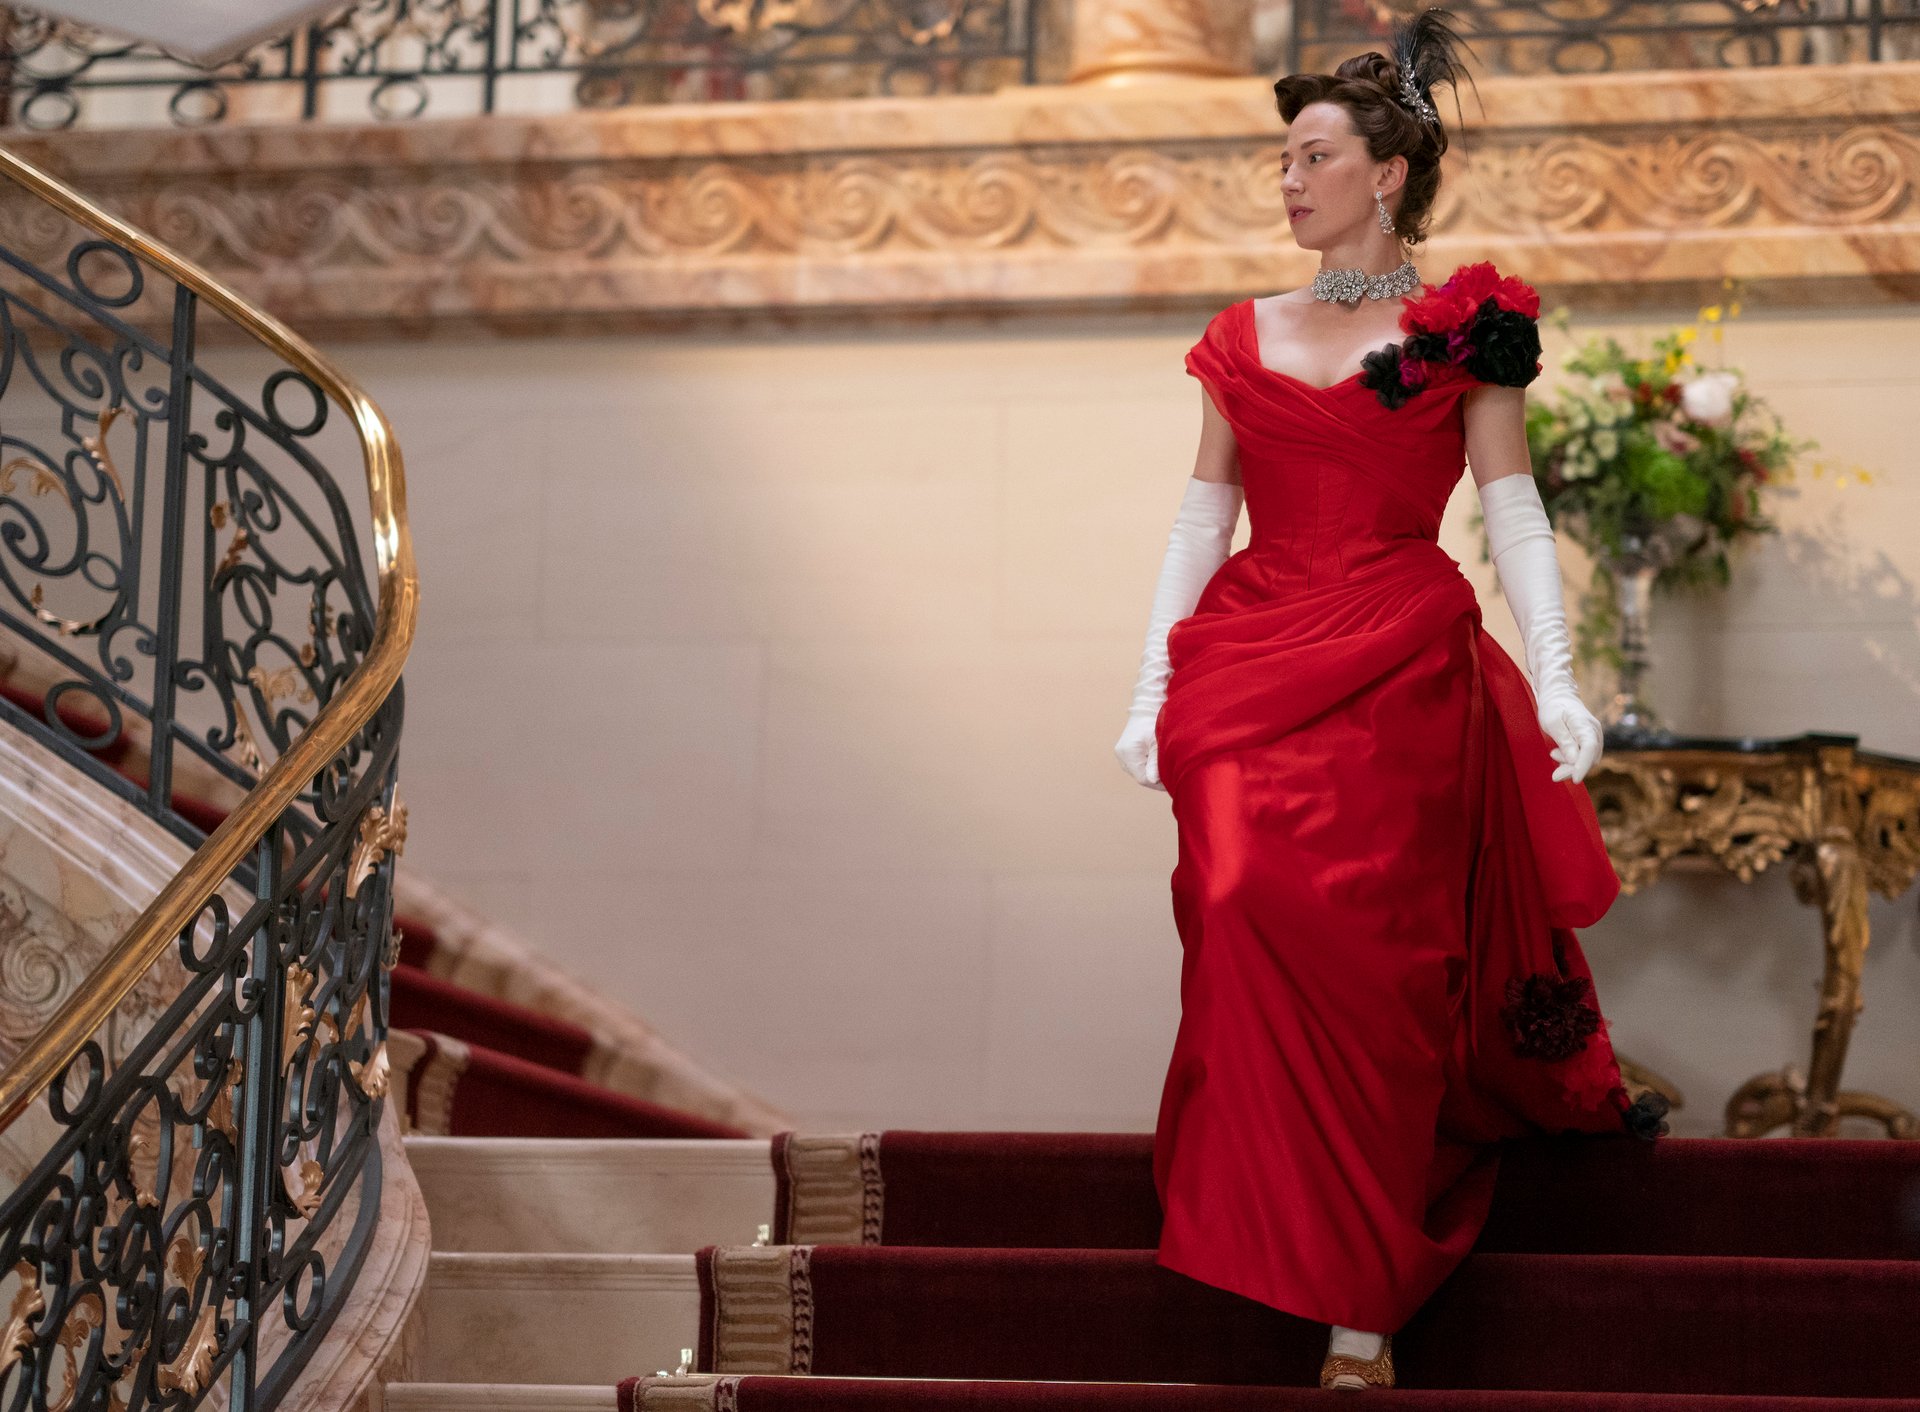 Carrie Coon as Bertha Russell, wearing a red dress and walking down the stairs, in 'The Gilded Aged'